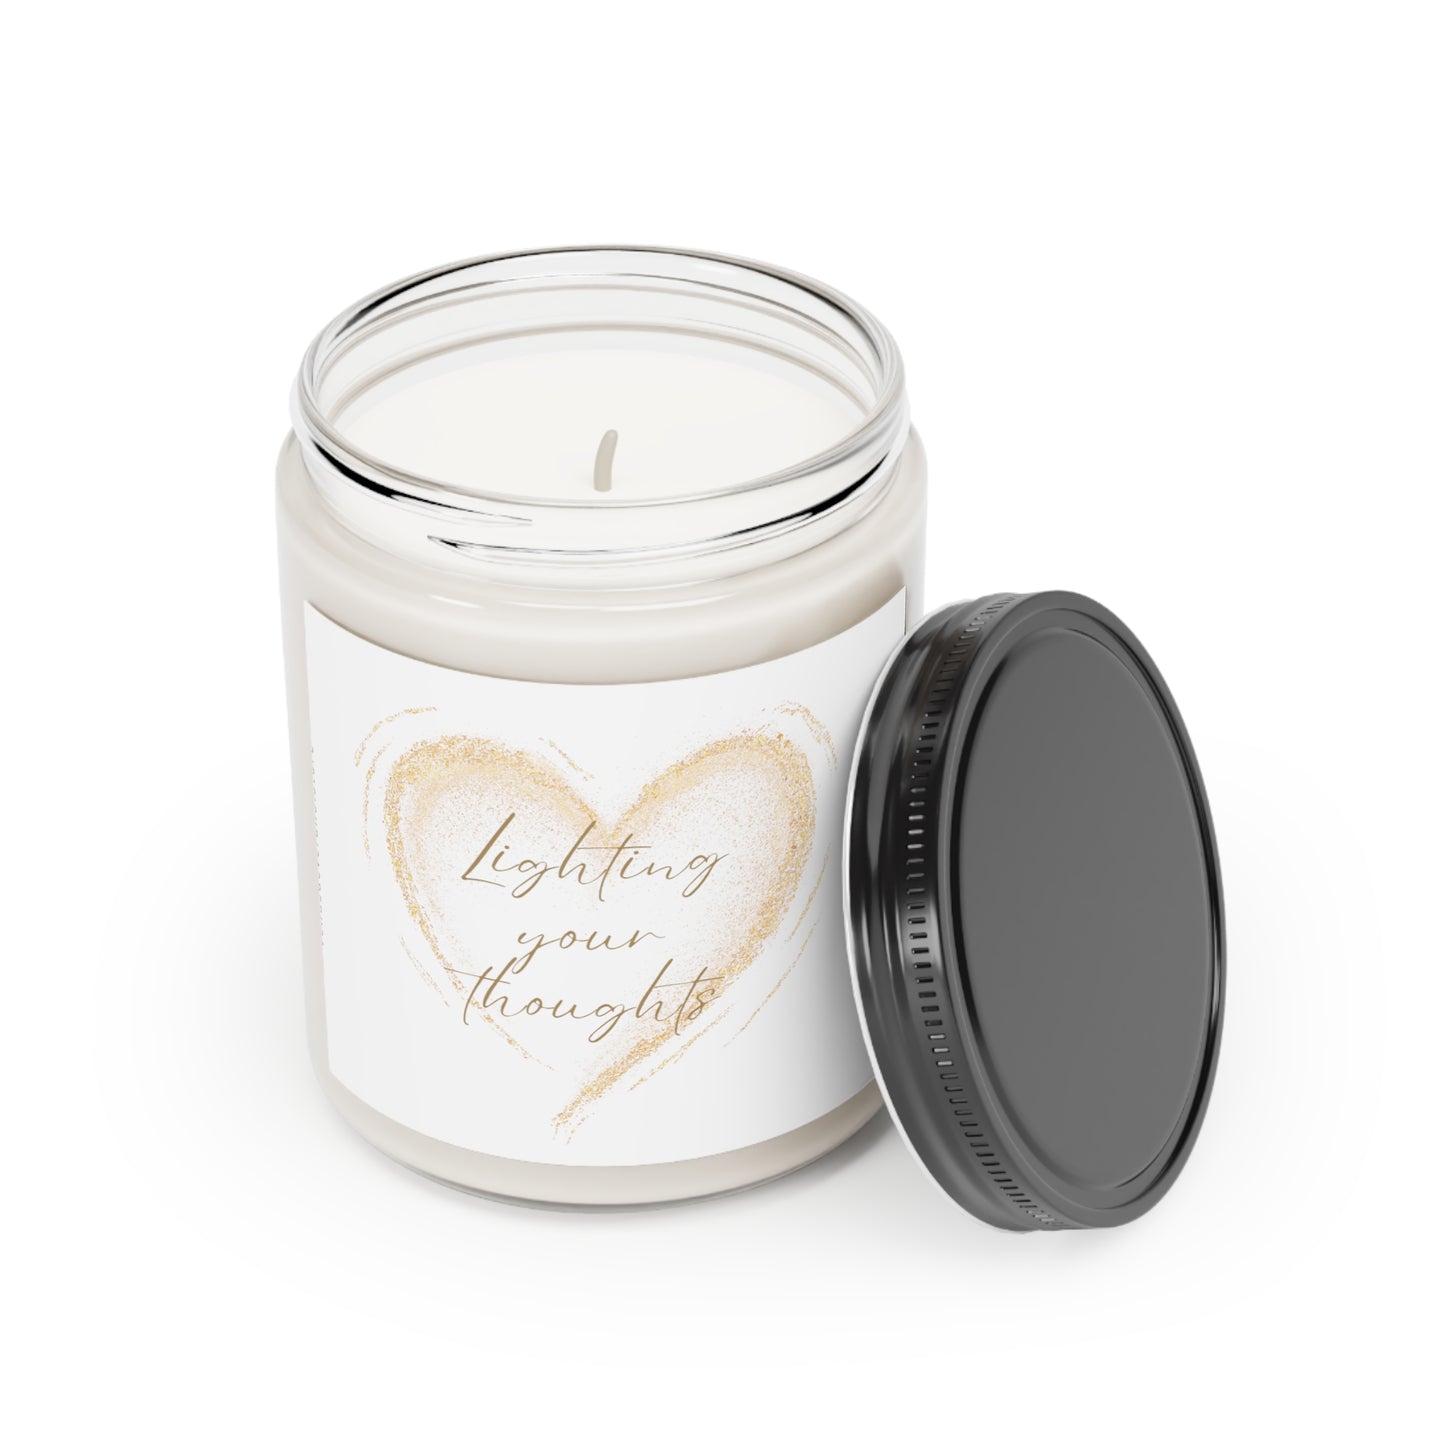 Scented Candle, 9oz - LIGHTING your thoughts - Made from vegan soy coconut wax, hand-poured | 2 ambrosial fragrances available, Cinnamon Stick and Vanilla.